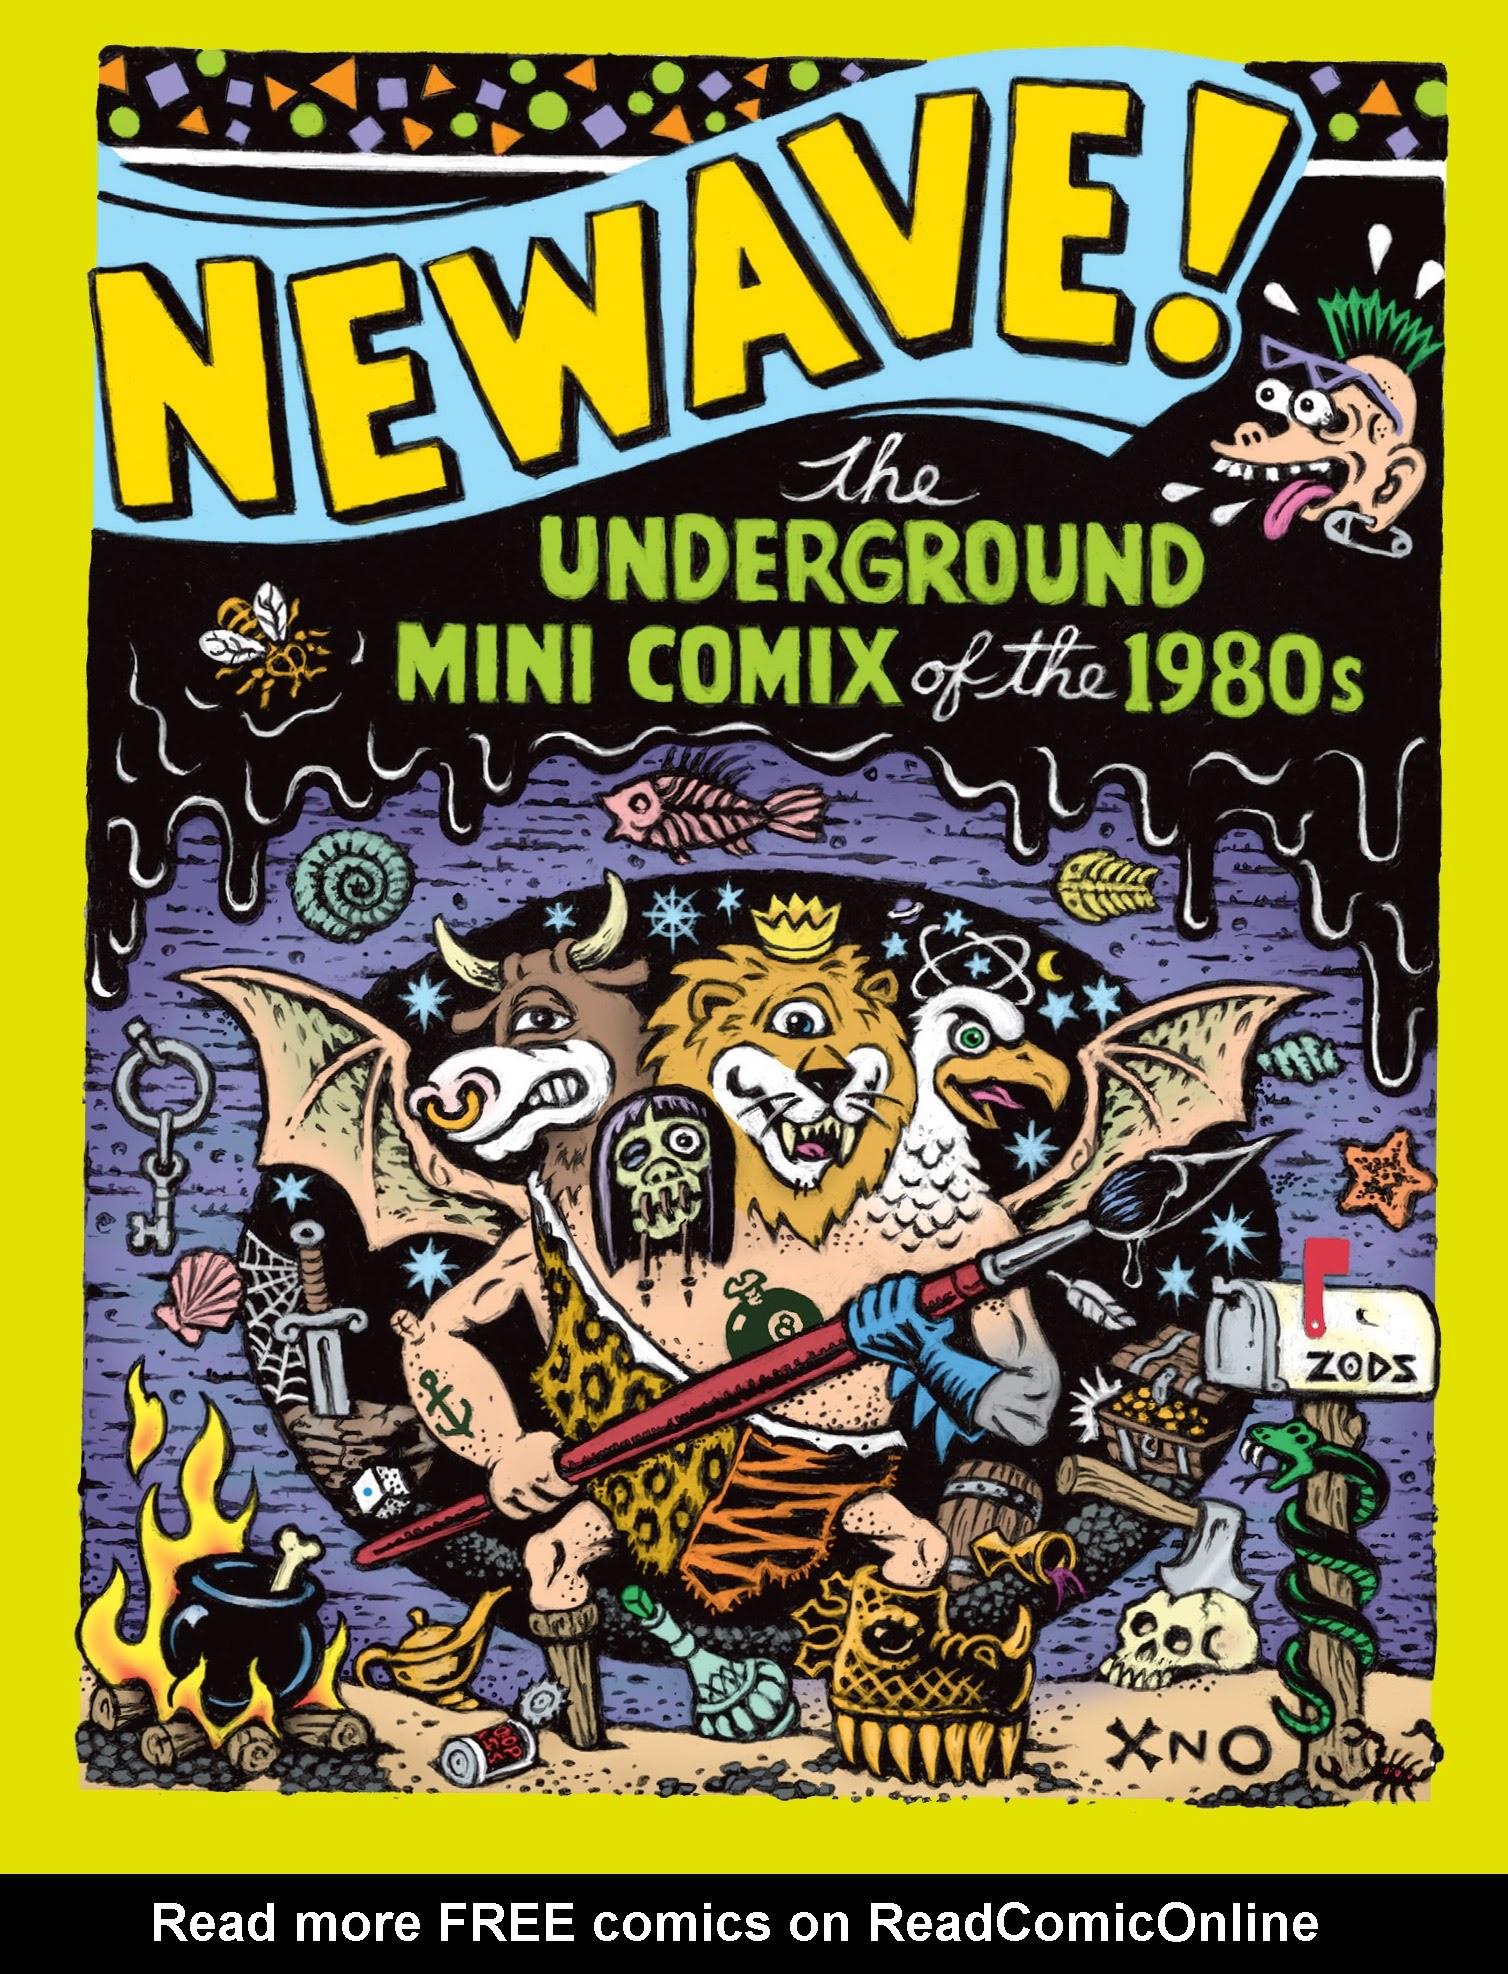 Read online NEWAVE! The Underground Mini Comix of the 1980's comic -  Issue # TPB (Part 1) - 1